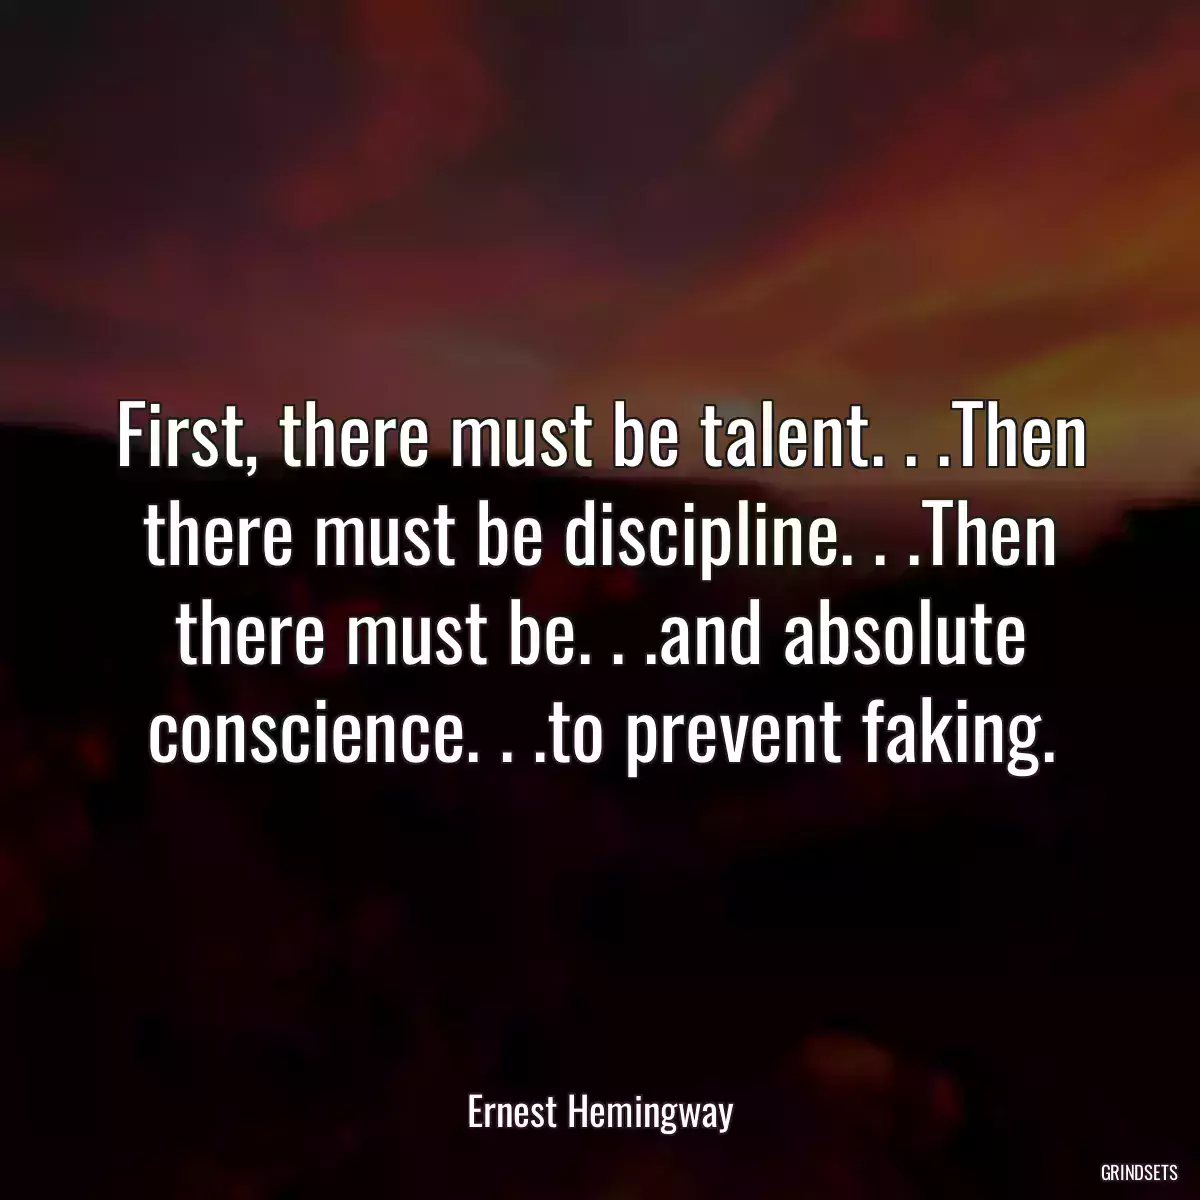 First, there must be talent. . .Then there must be discipline. . .Then there must be. . .and absolute conscience. . .to prevent faking.